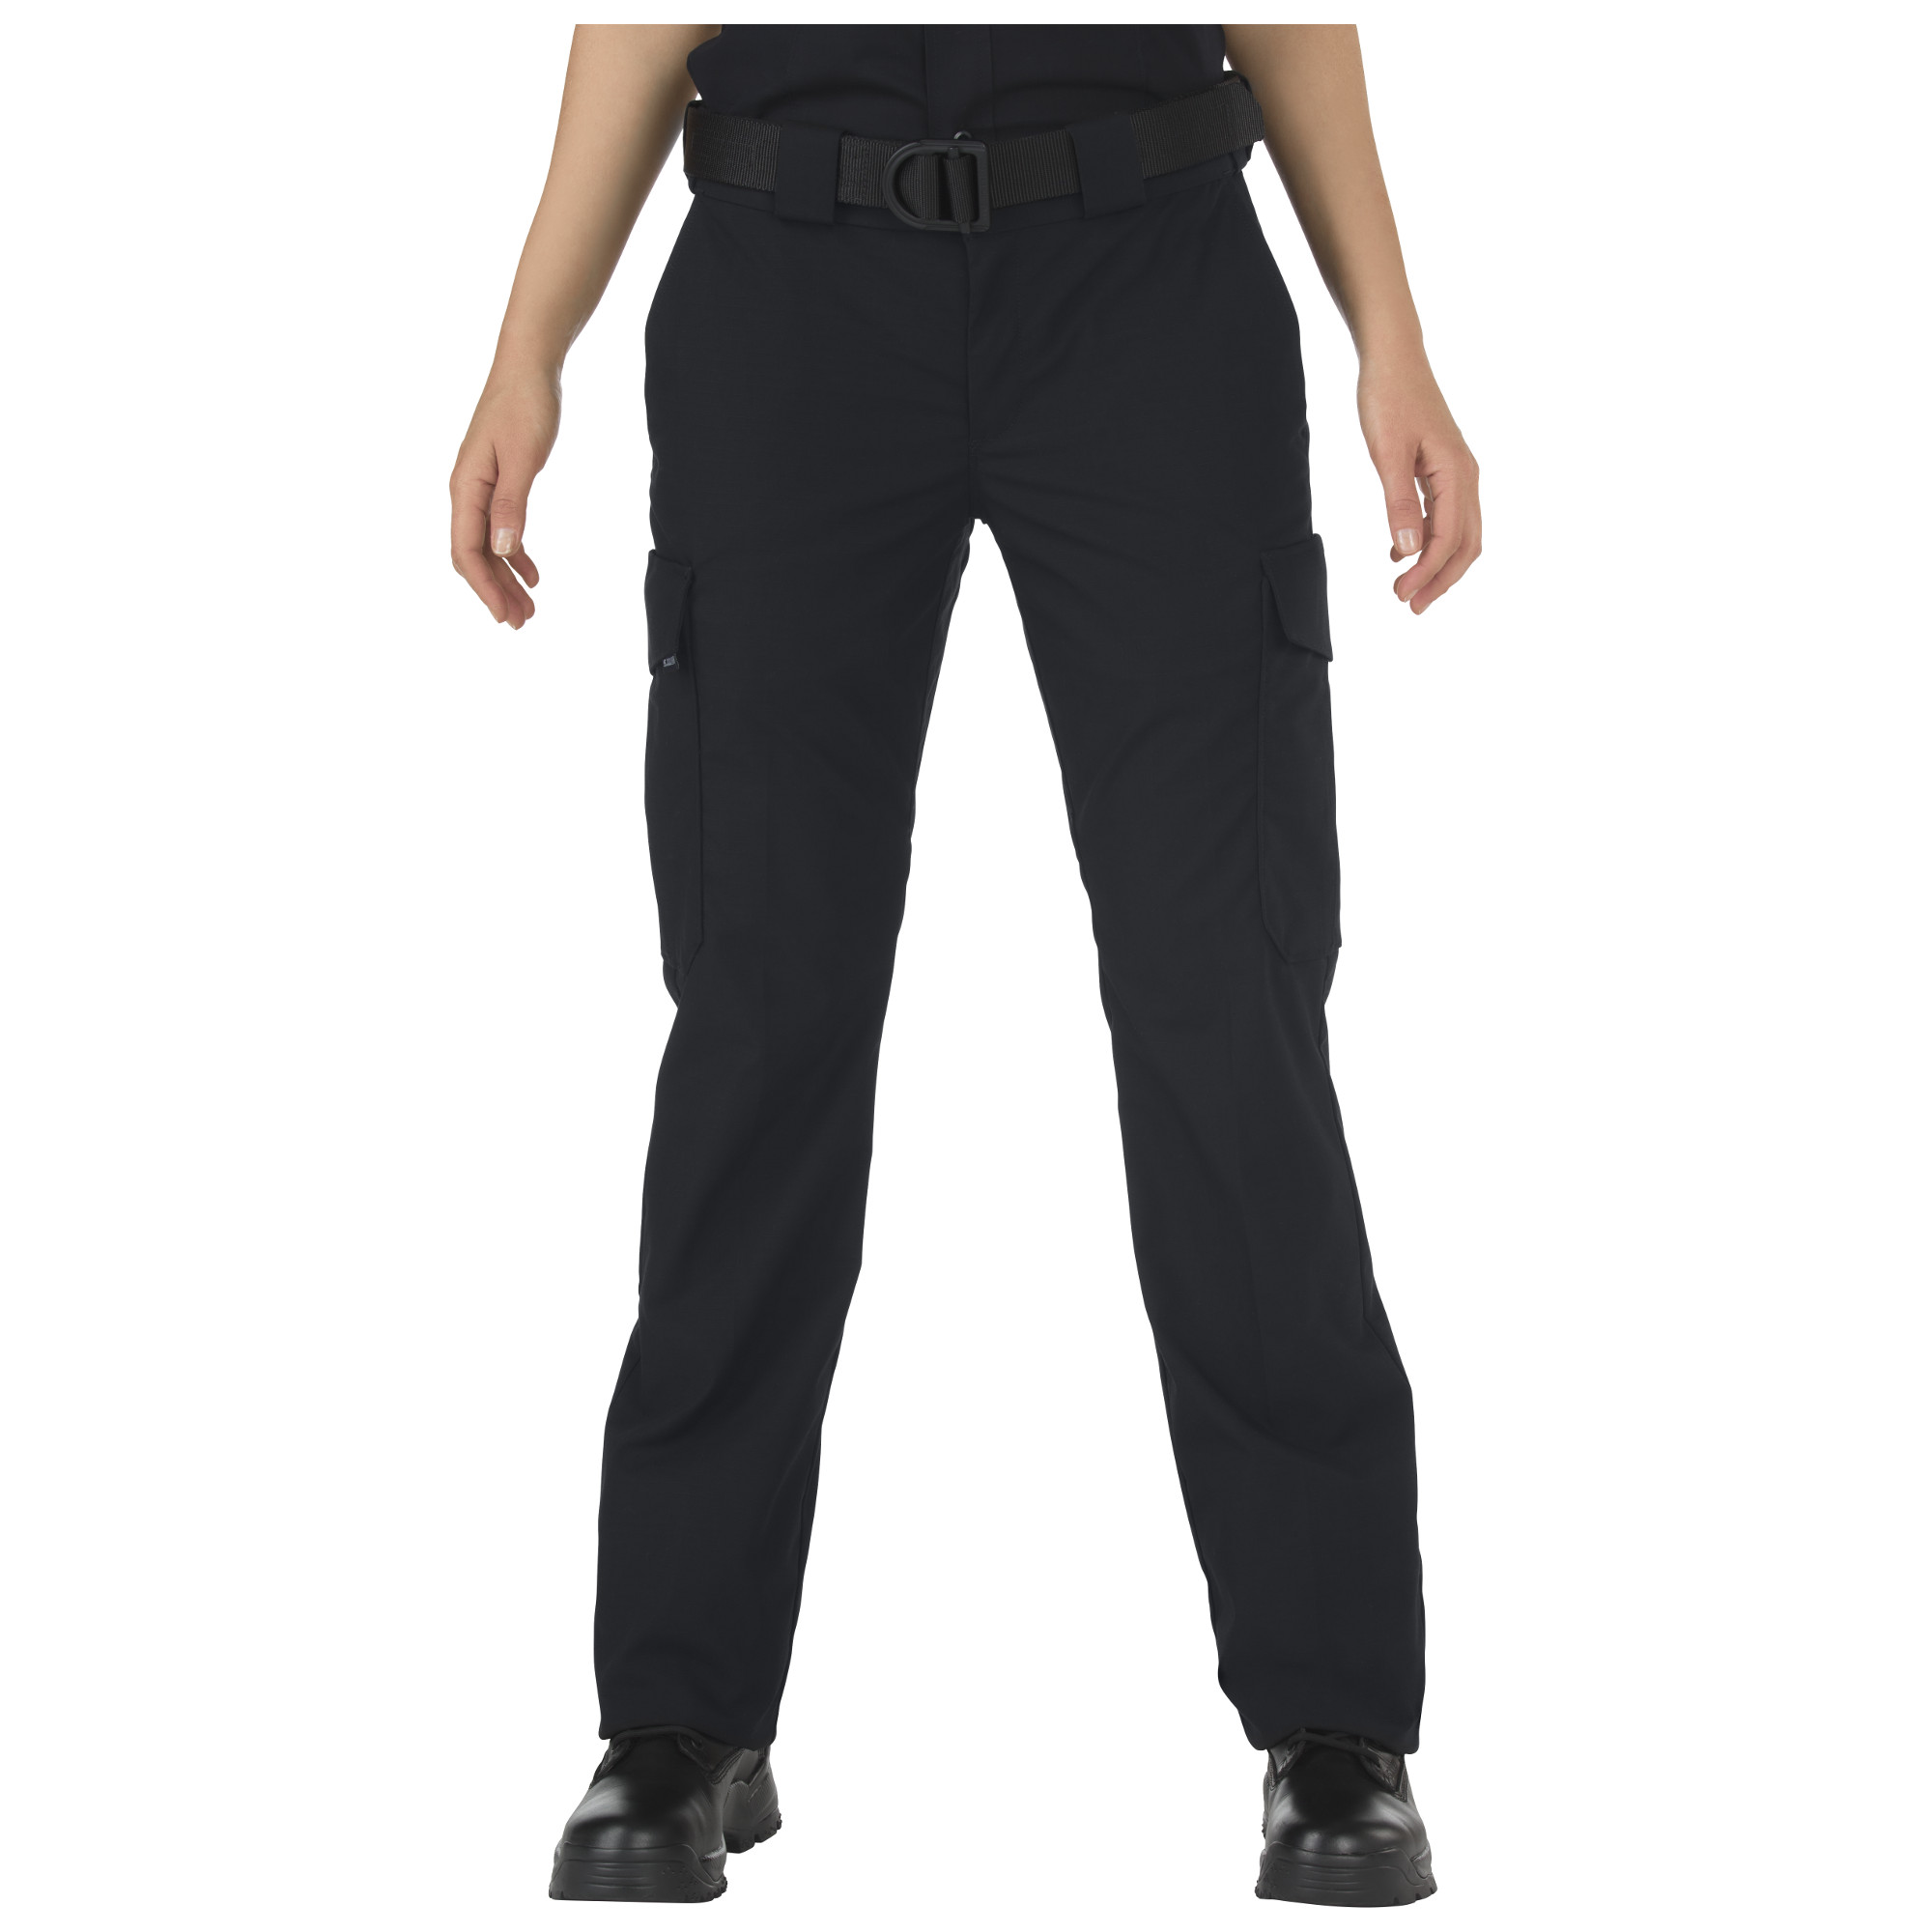 5.11 Strykeâ ¢ Class-B Pdu Cargo Pant From 5.11 Tactical-